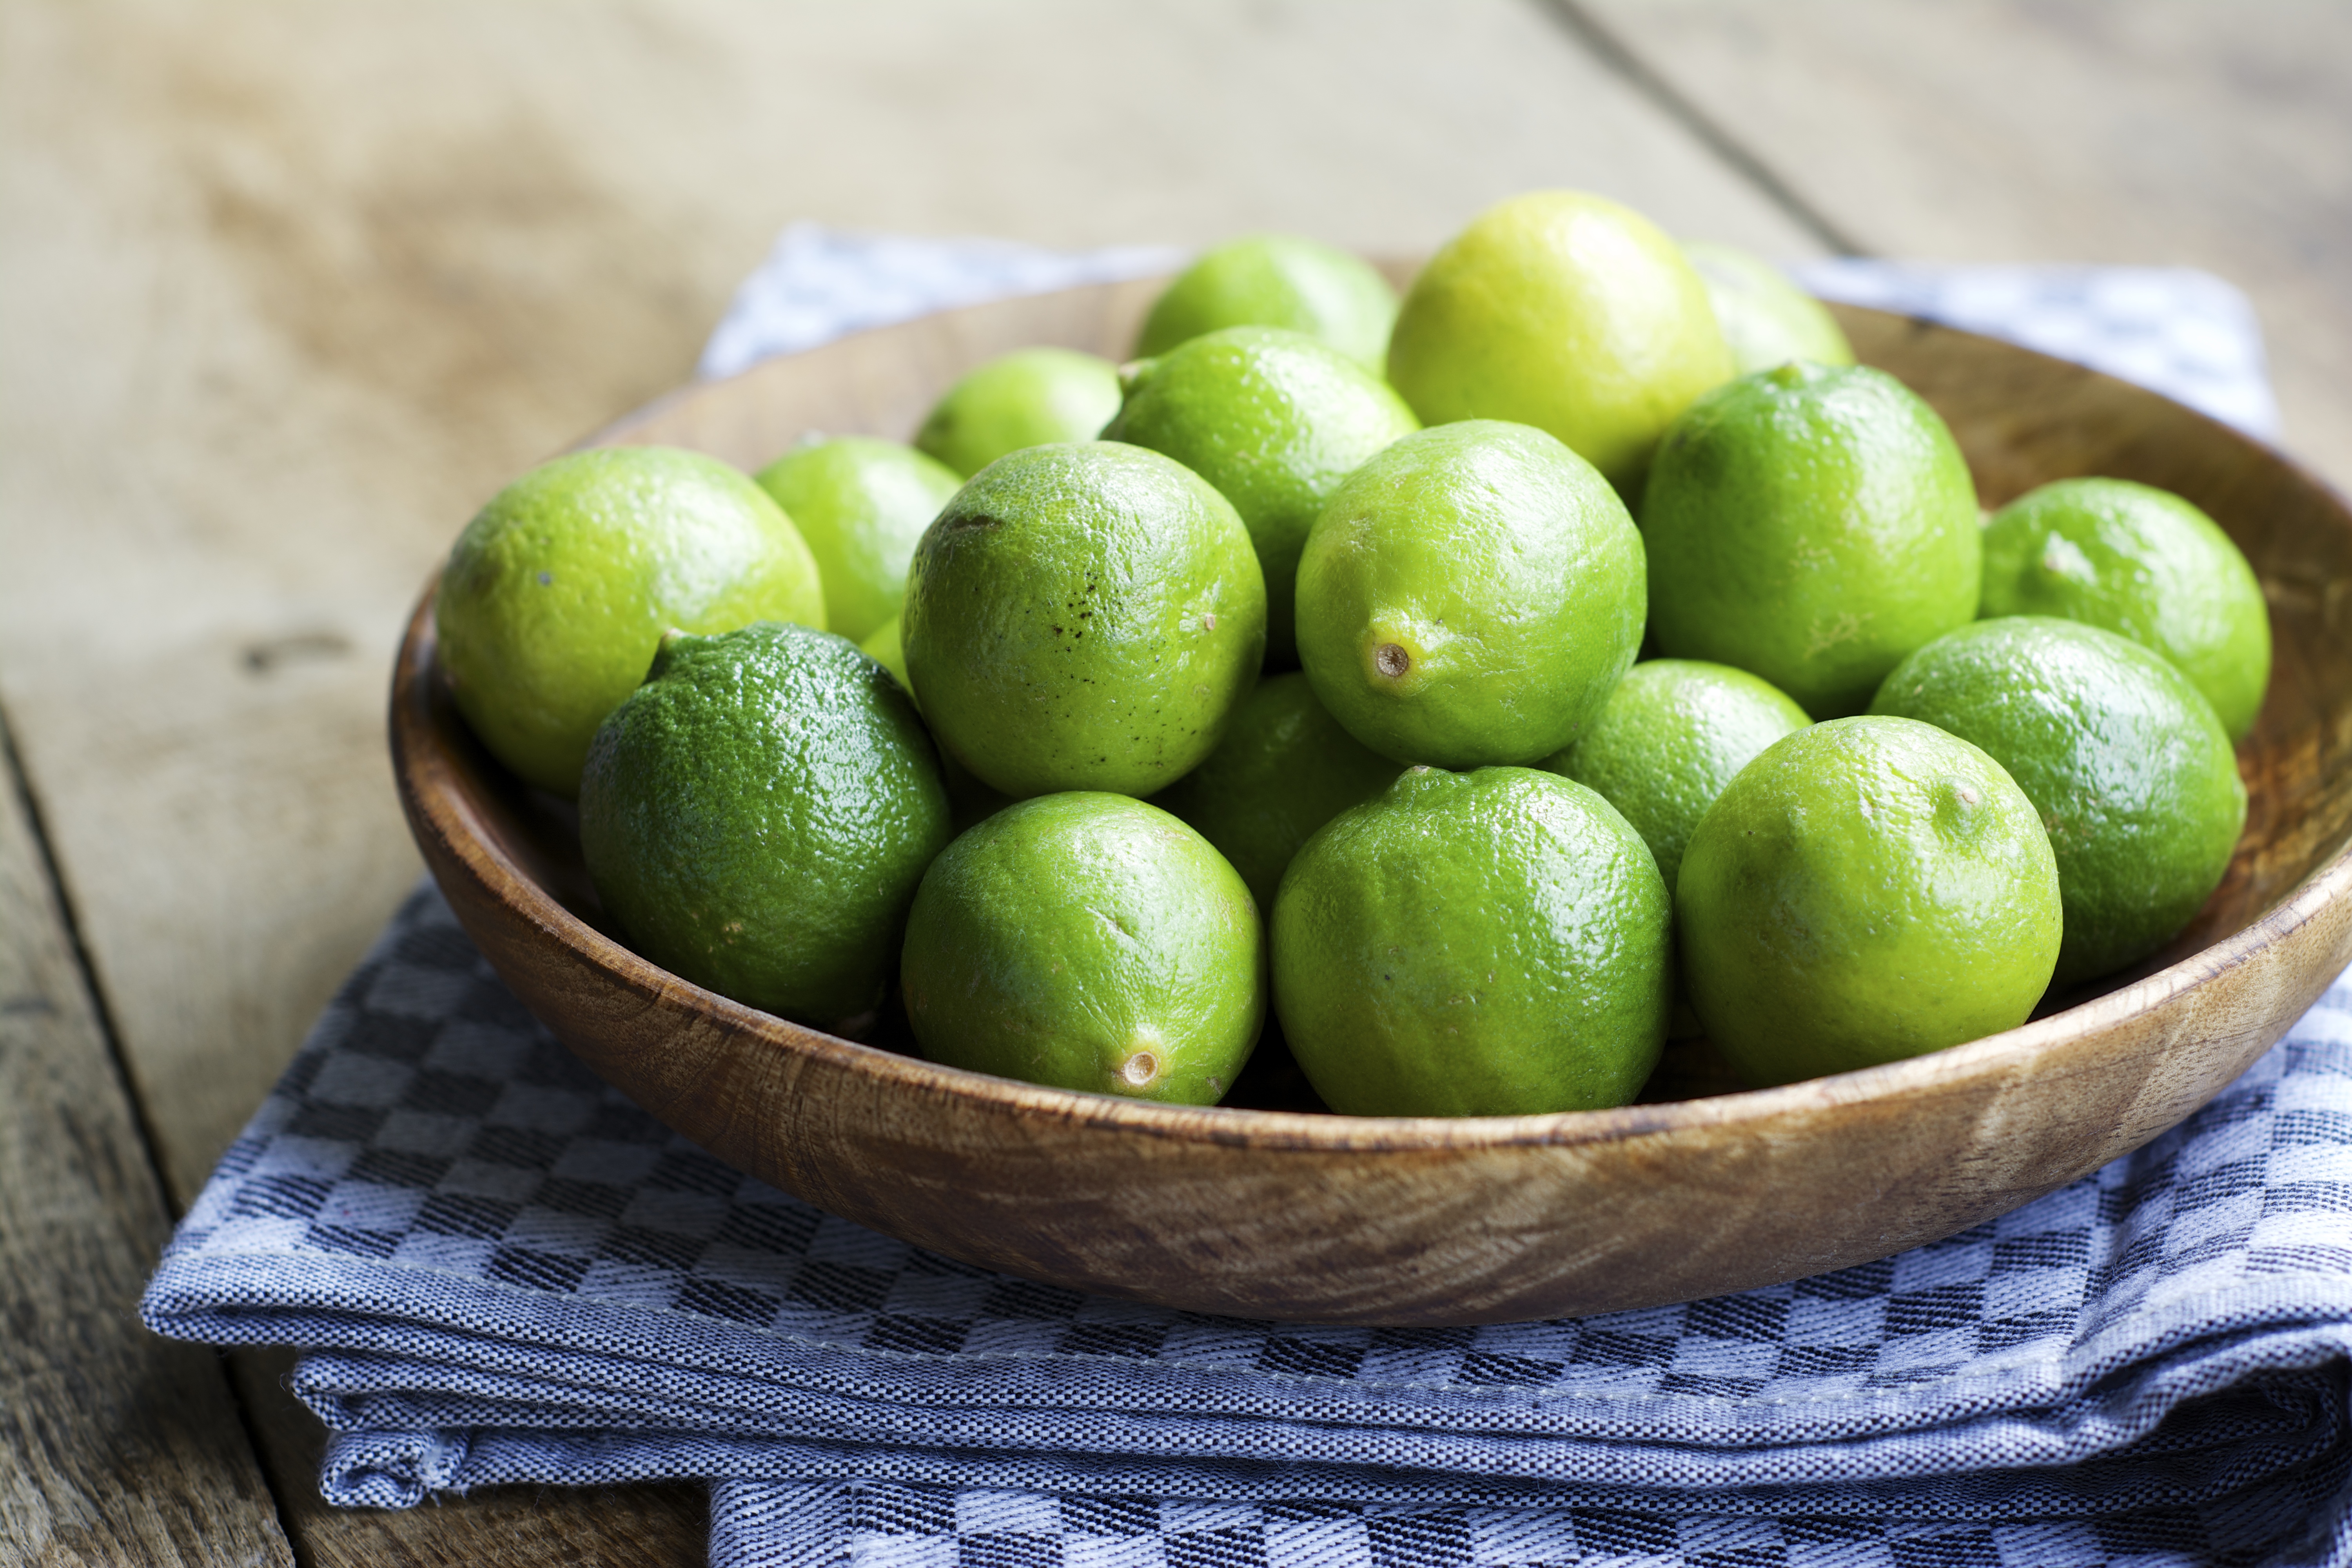 Limes in a wooden bowl. | Source: Getty Images